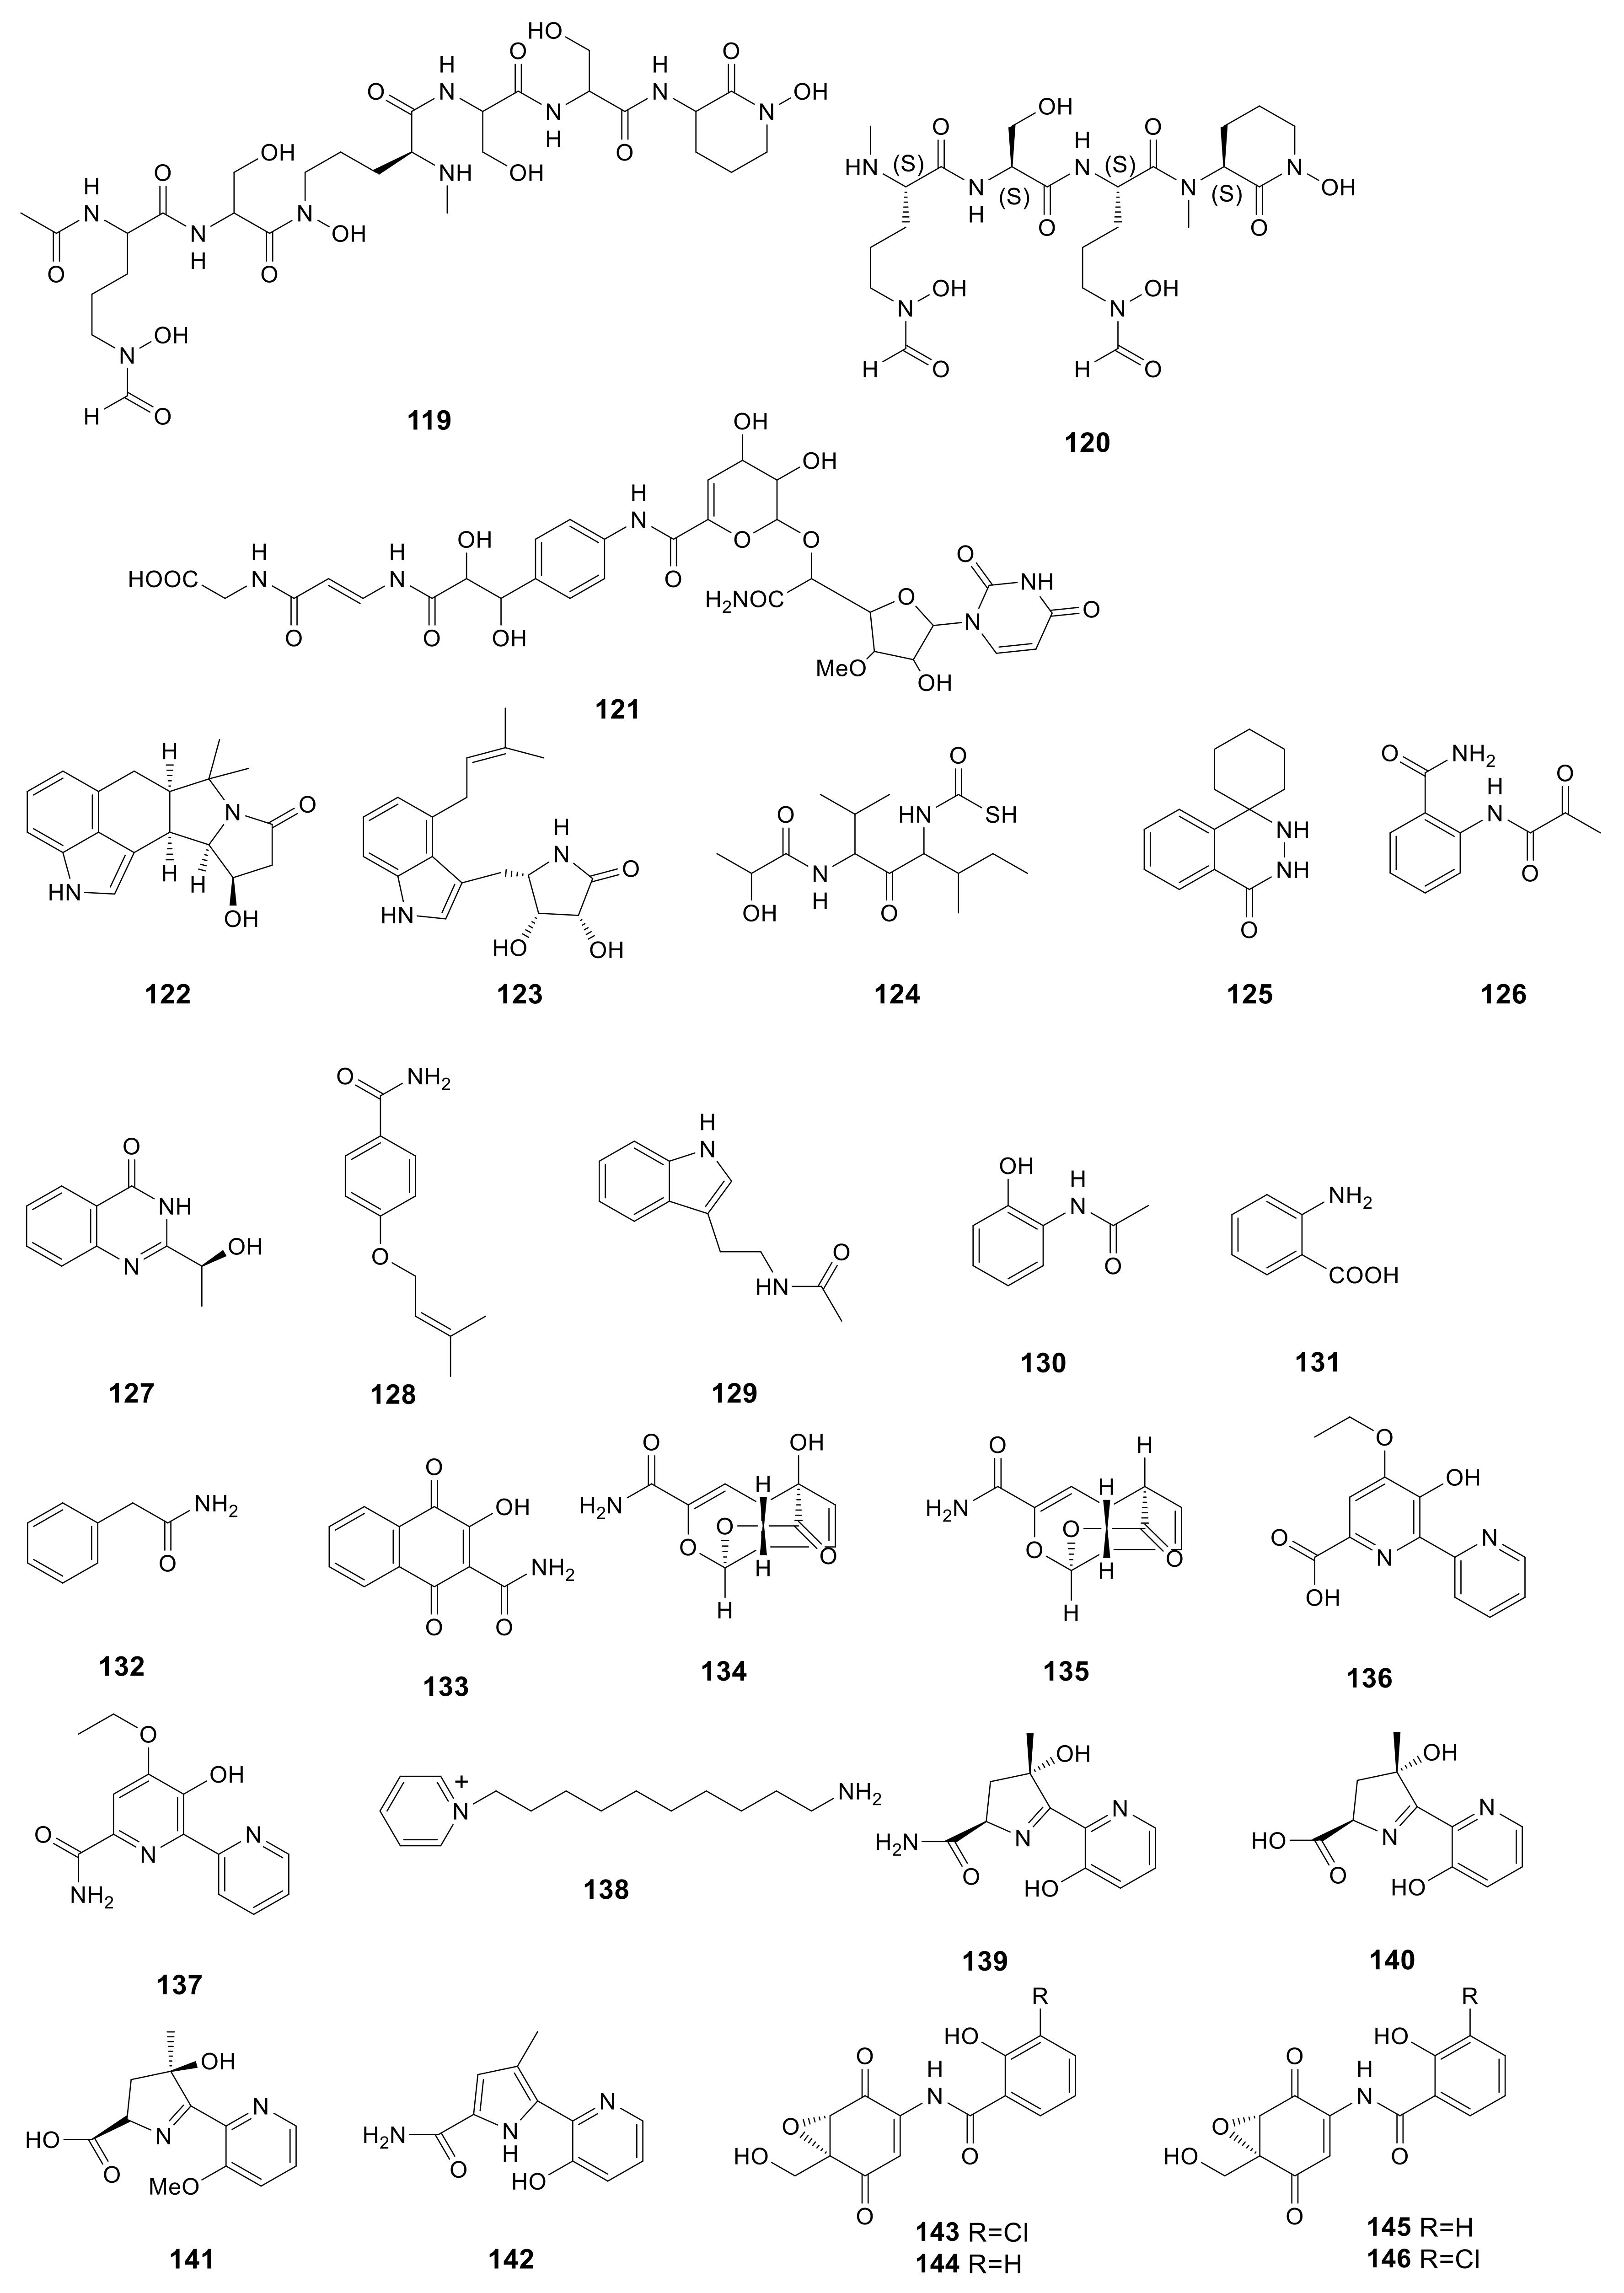 Molecules Free Full Text Secondary Metabolites Of The Genus Amycolatopsis Structures Bioactivities And Biosynthesis